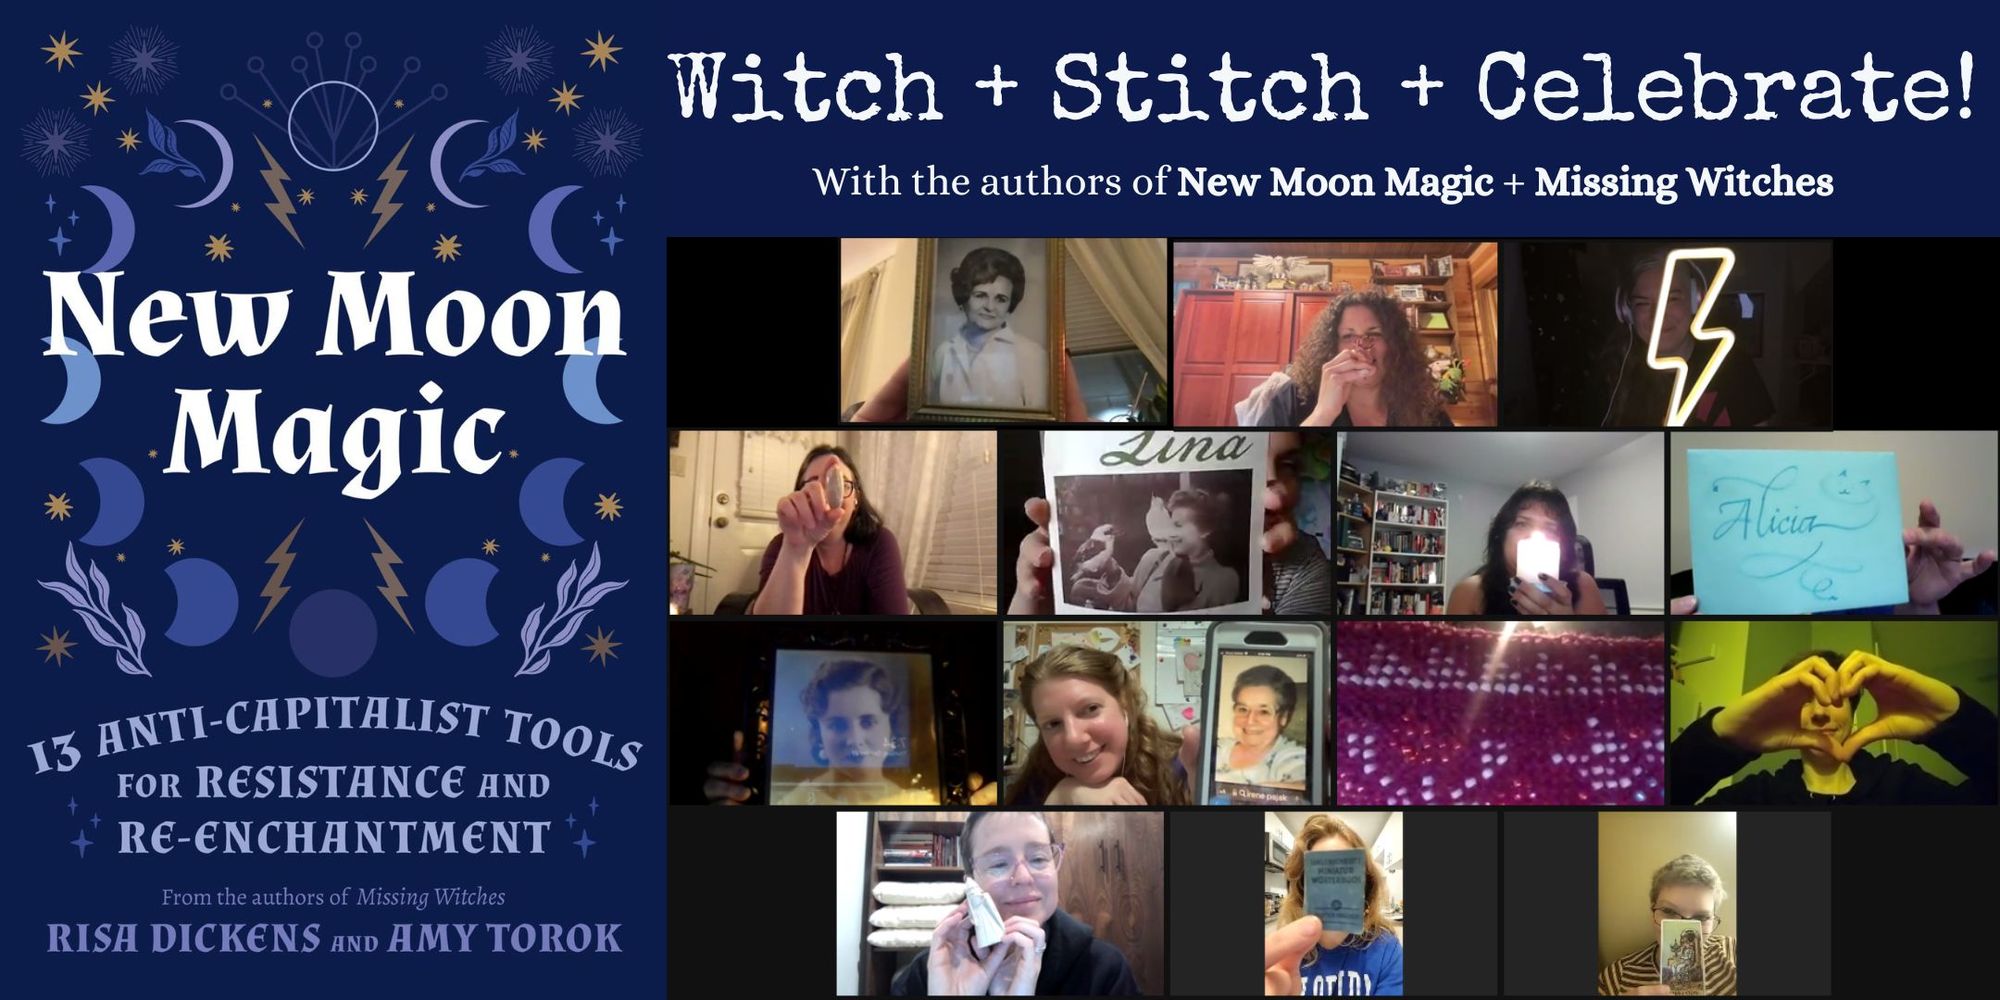 Cover of the New Moon Magic book with its purple moons. Next to a screenshot from a Missing Witches zoom circle with multiple screens of people smiling or covering their faces with family pictures or personal talismans. Text says Witch and Sitch and Celebrate.